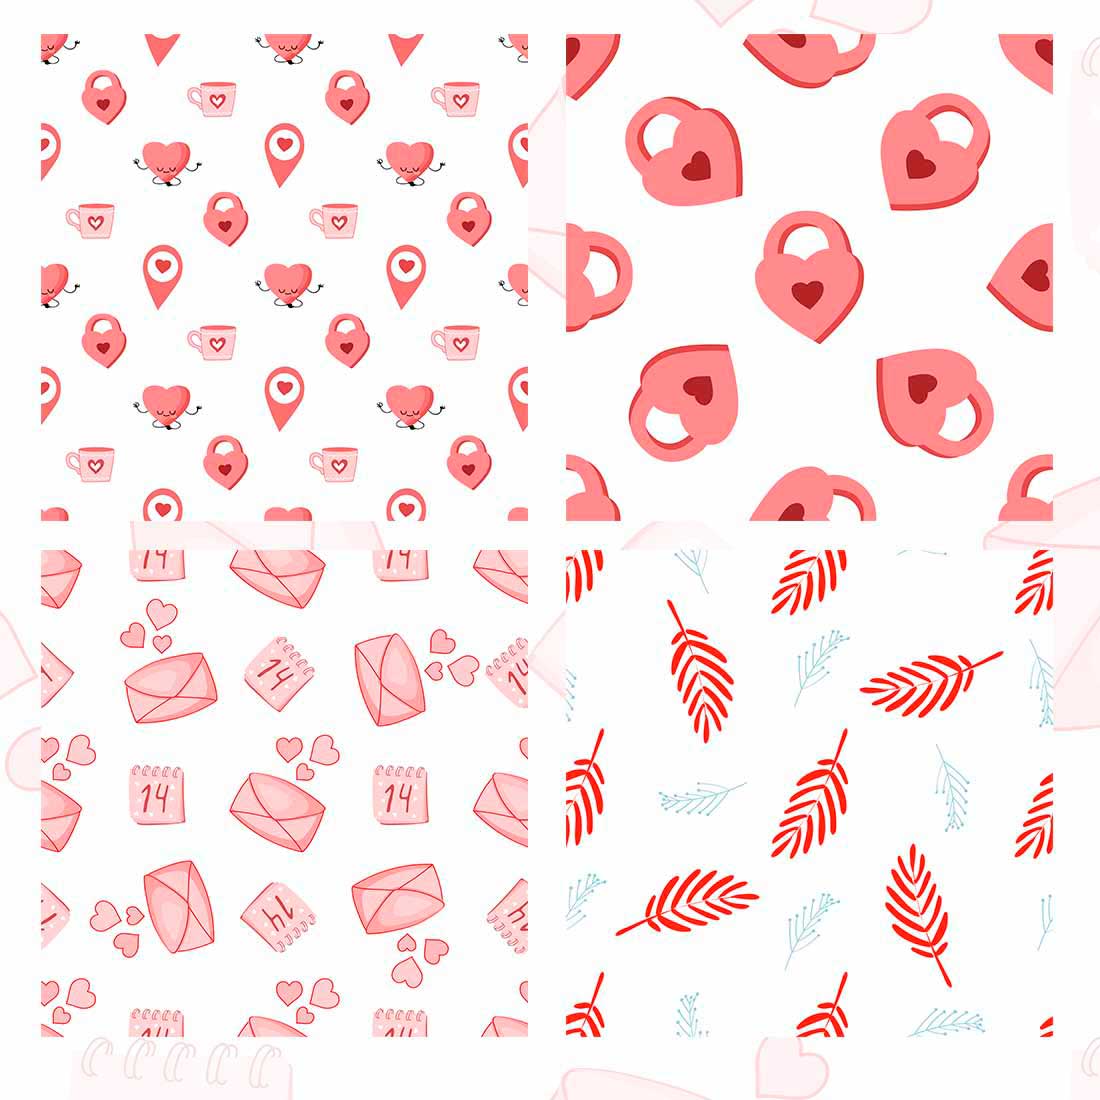 Set of images of beautiful patterns with hearts.